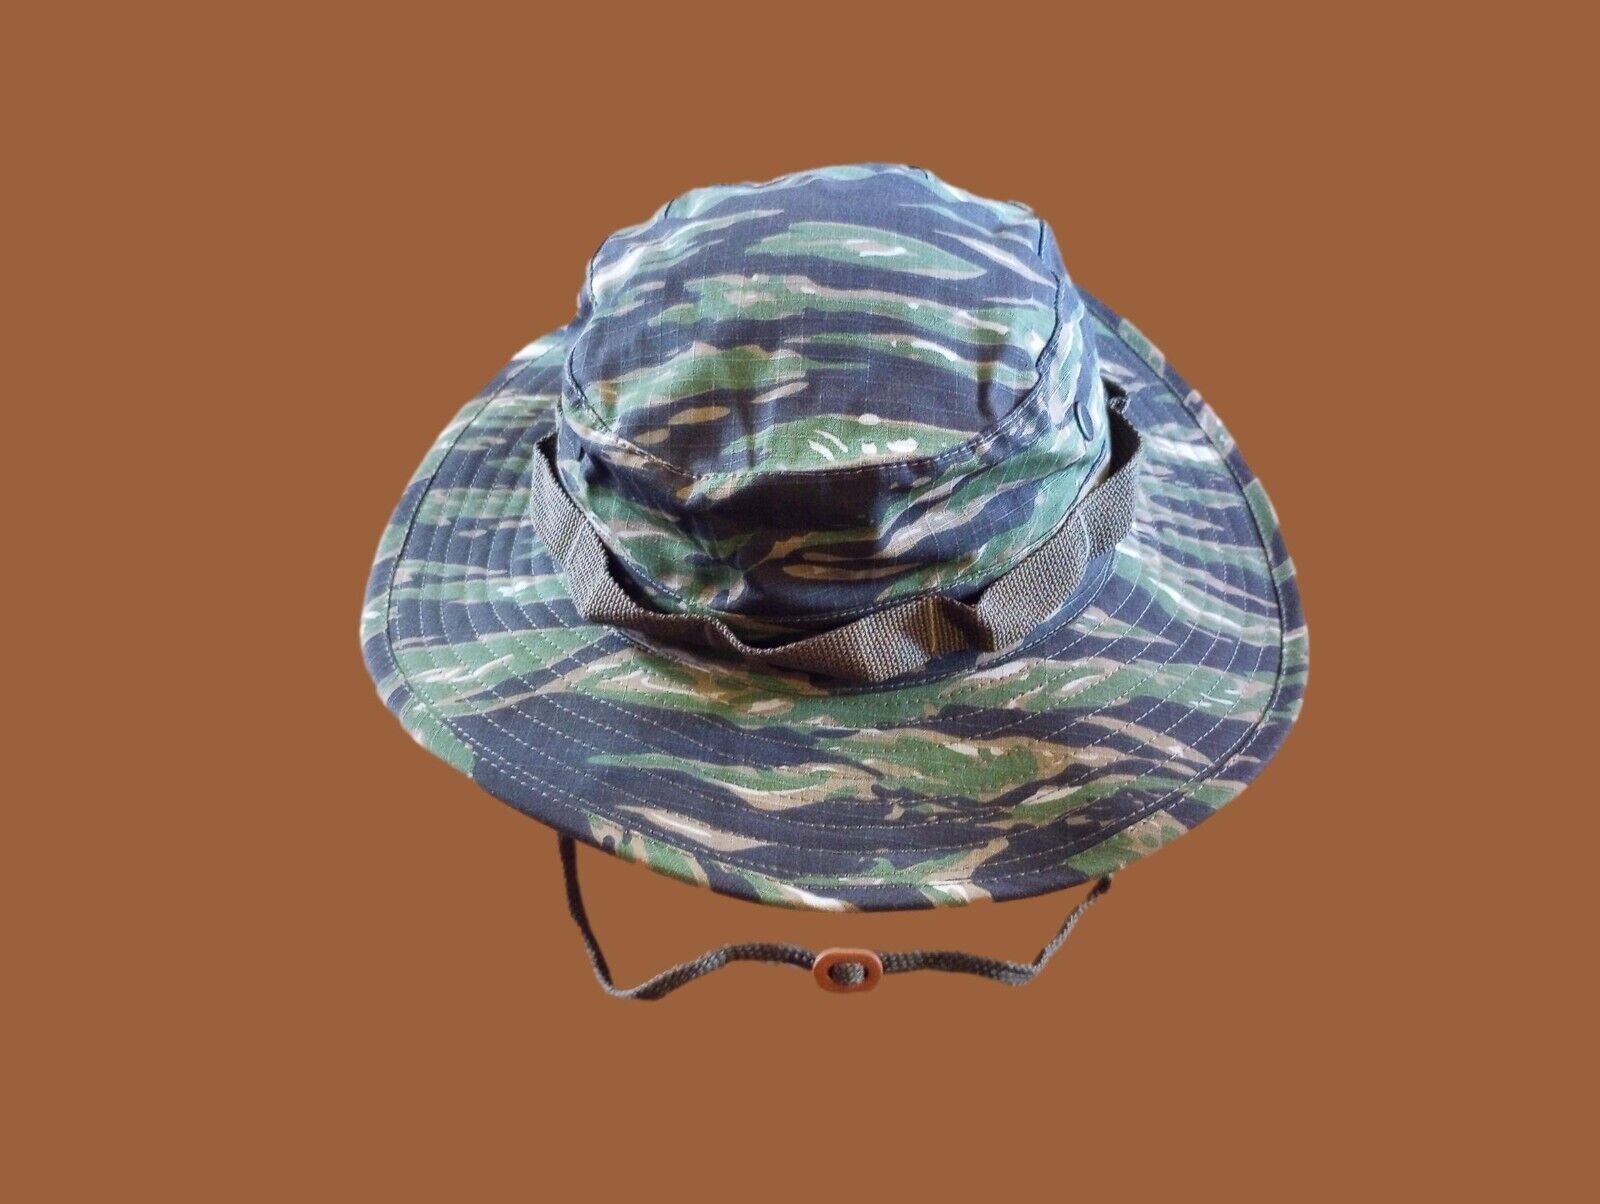 U.S MILITARY STYLE BOONIE HAT TIGER STRIPE CAMOUFLAGE VIETNAM REPRODUCTION 7 1/4